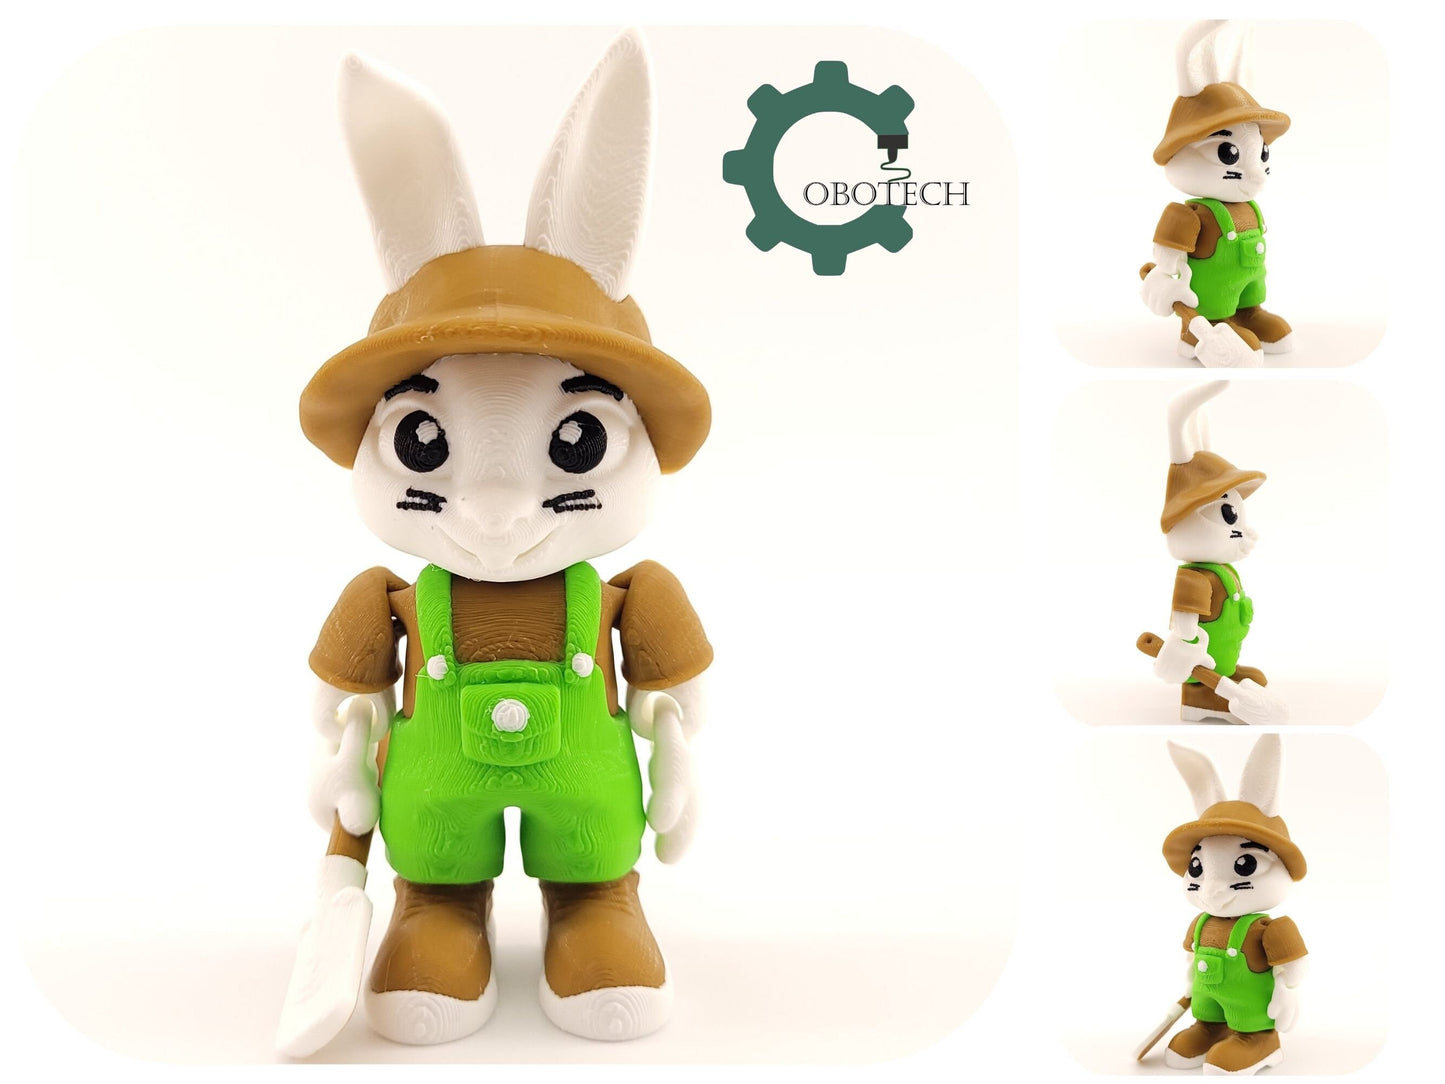 3D Print Articulated Bunny Farmer by Cobotech, Articulated Toys, Desk Decor, Easter Cool Gifts